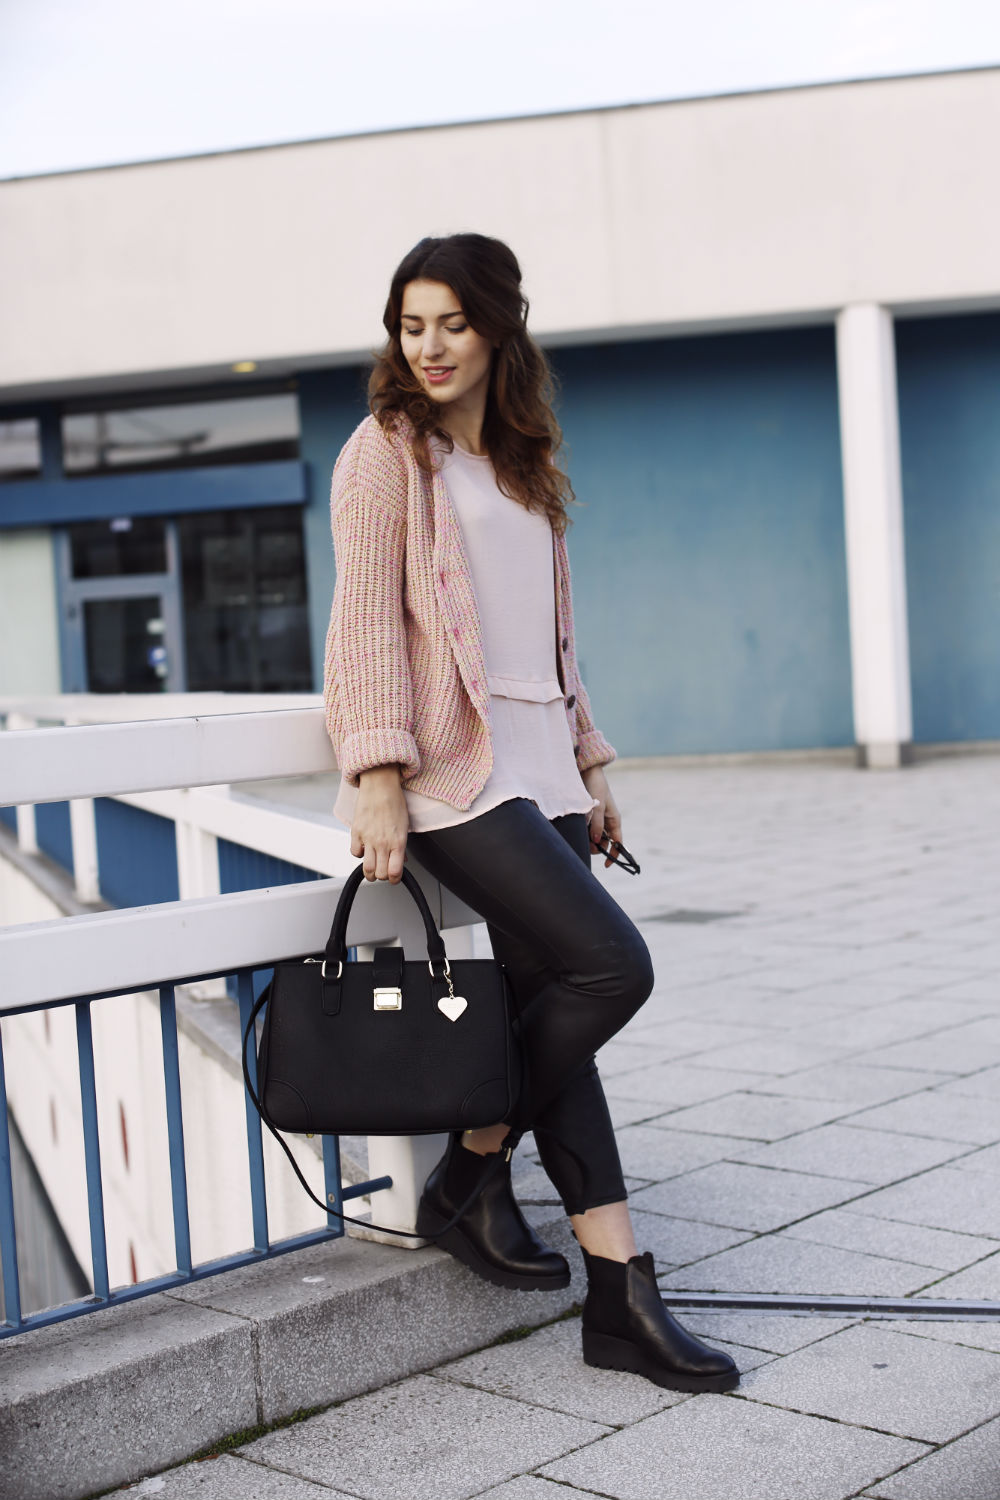 leather leggings_h&m chiffon pastel soft pink asos oversize knitted cardigan chunky boots plateau heels 90ies fashion boxy bag